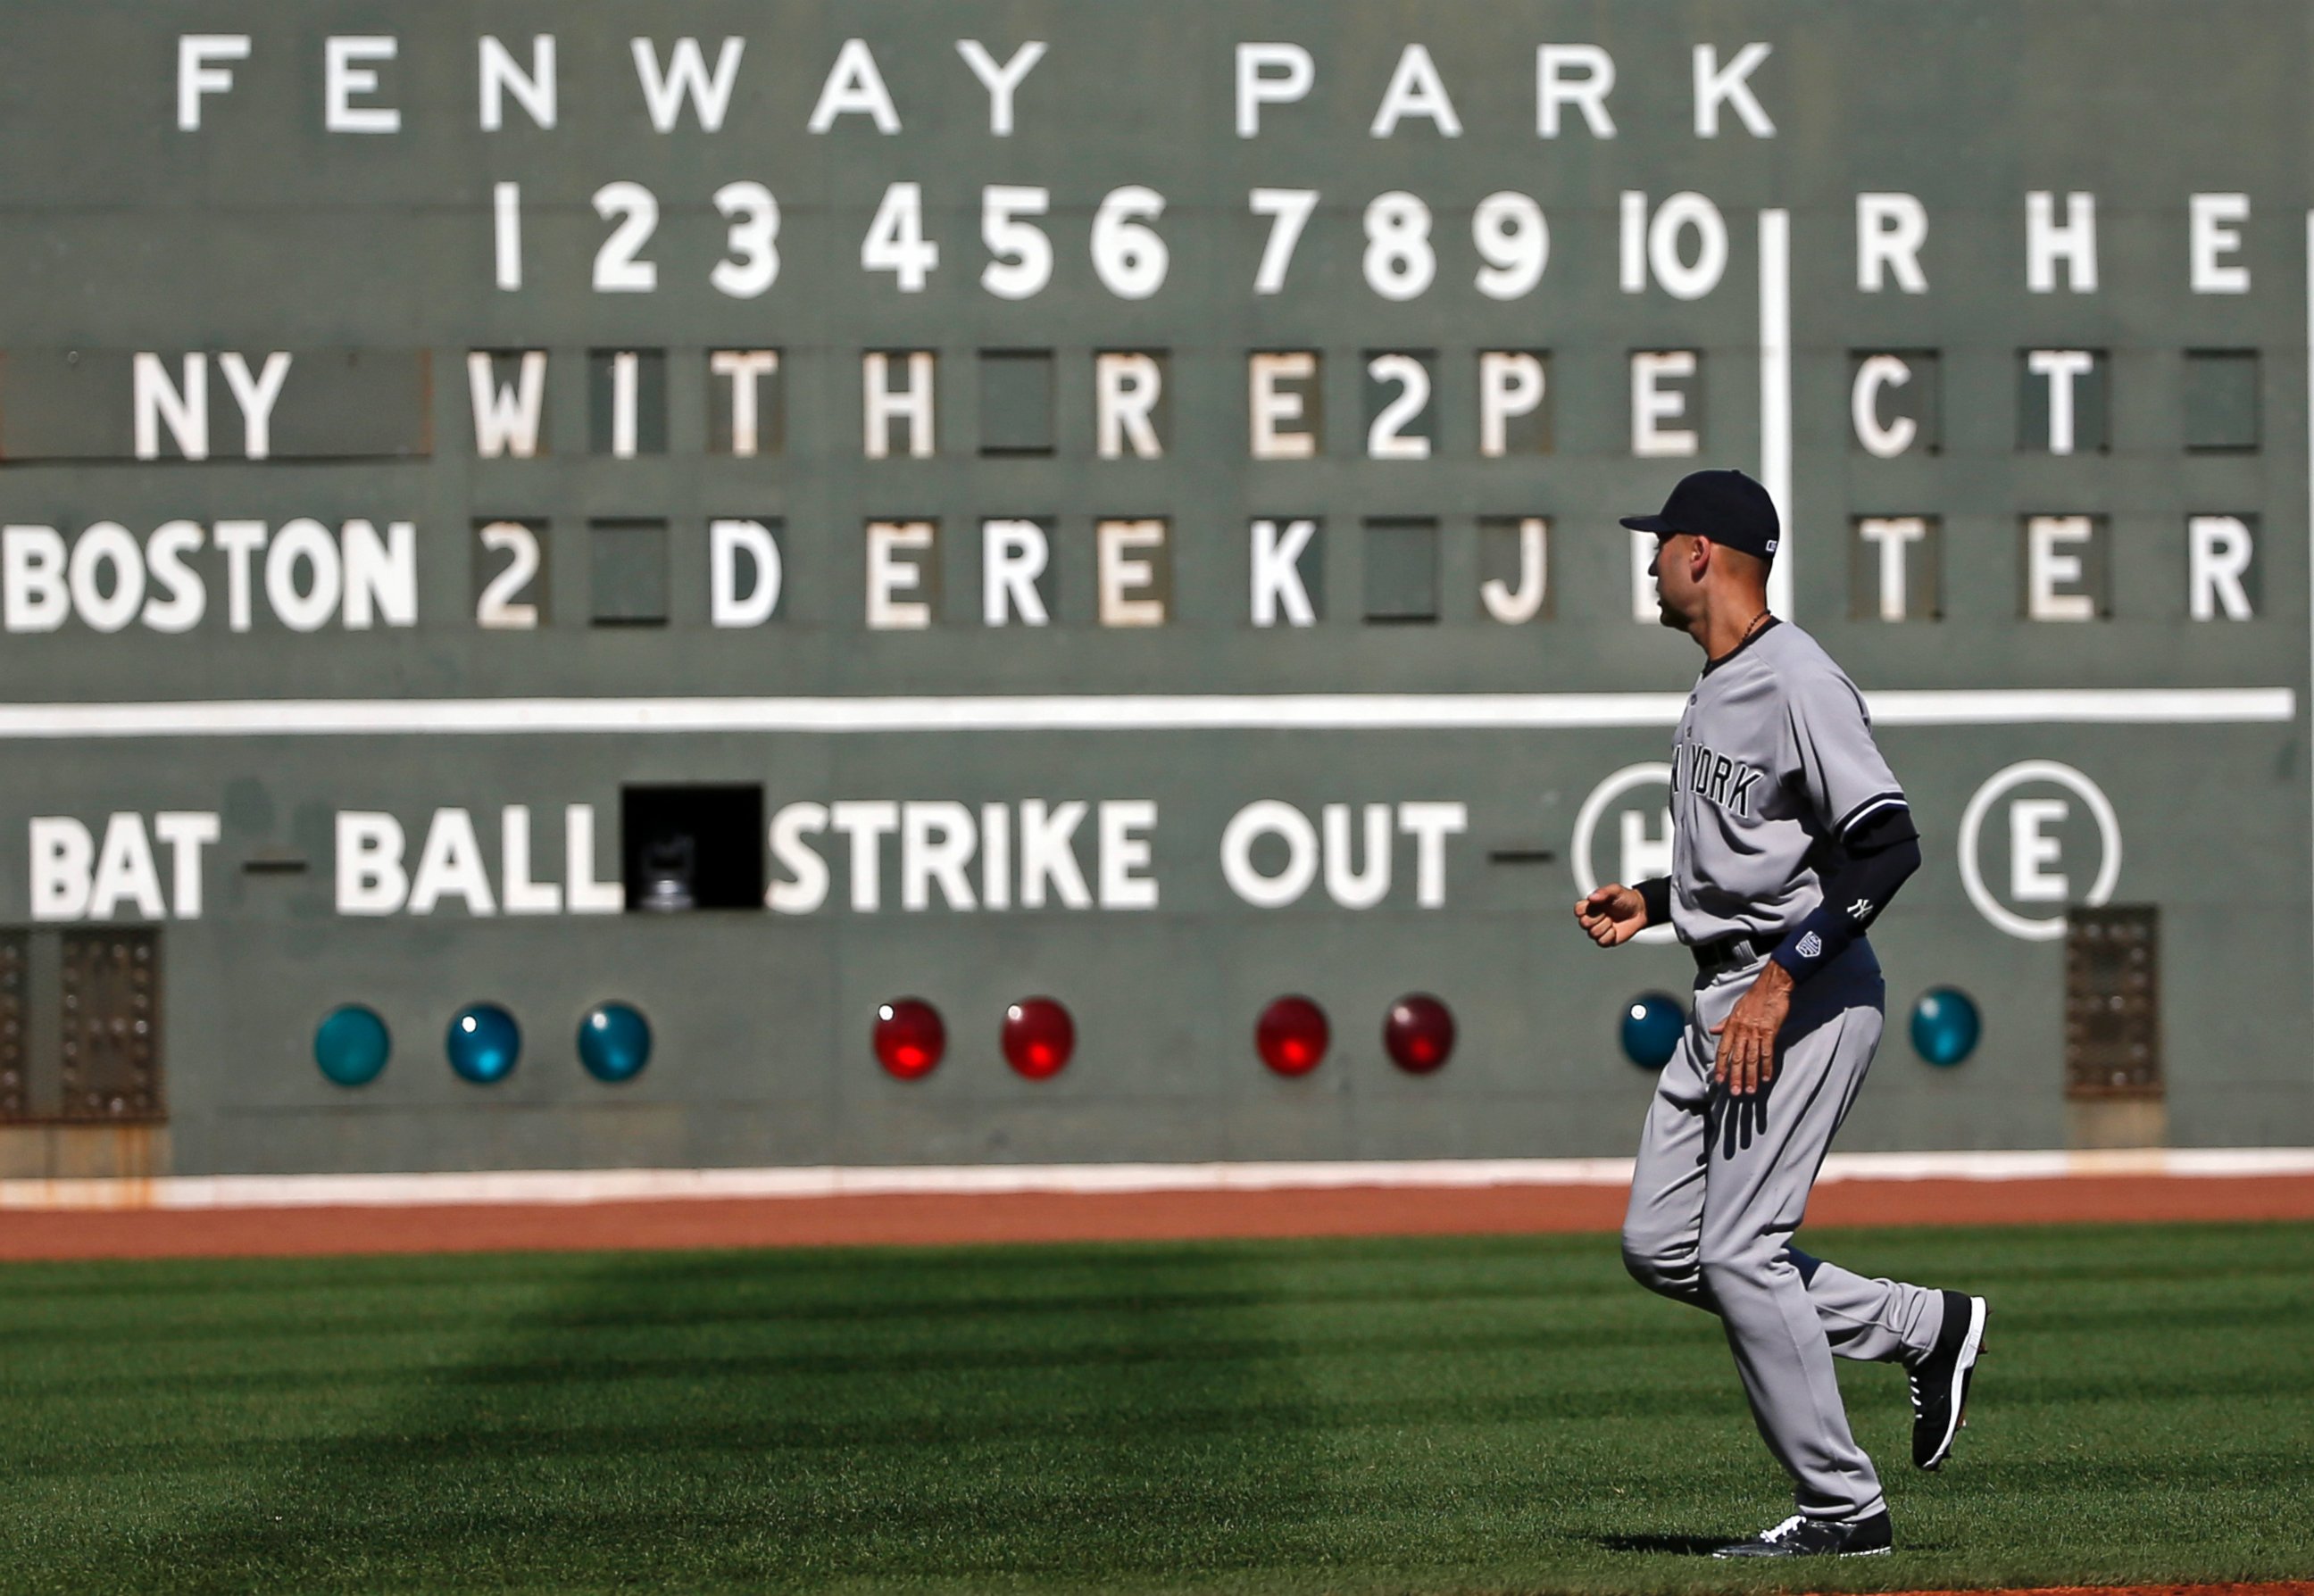 PHOTO: New York Yankees' Derek Jeter jogs on the field in front of a message to him on the Green Monster scoreboard at Fenway Park prior to a baseball game against the Boston Red Sox, Sept. 28, 2014, in Boston. It is the last baseball game of his career.